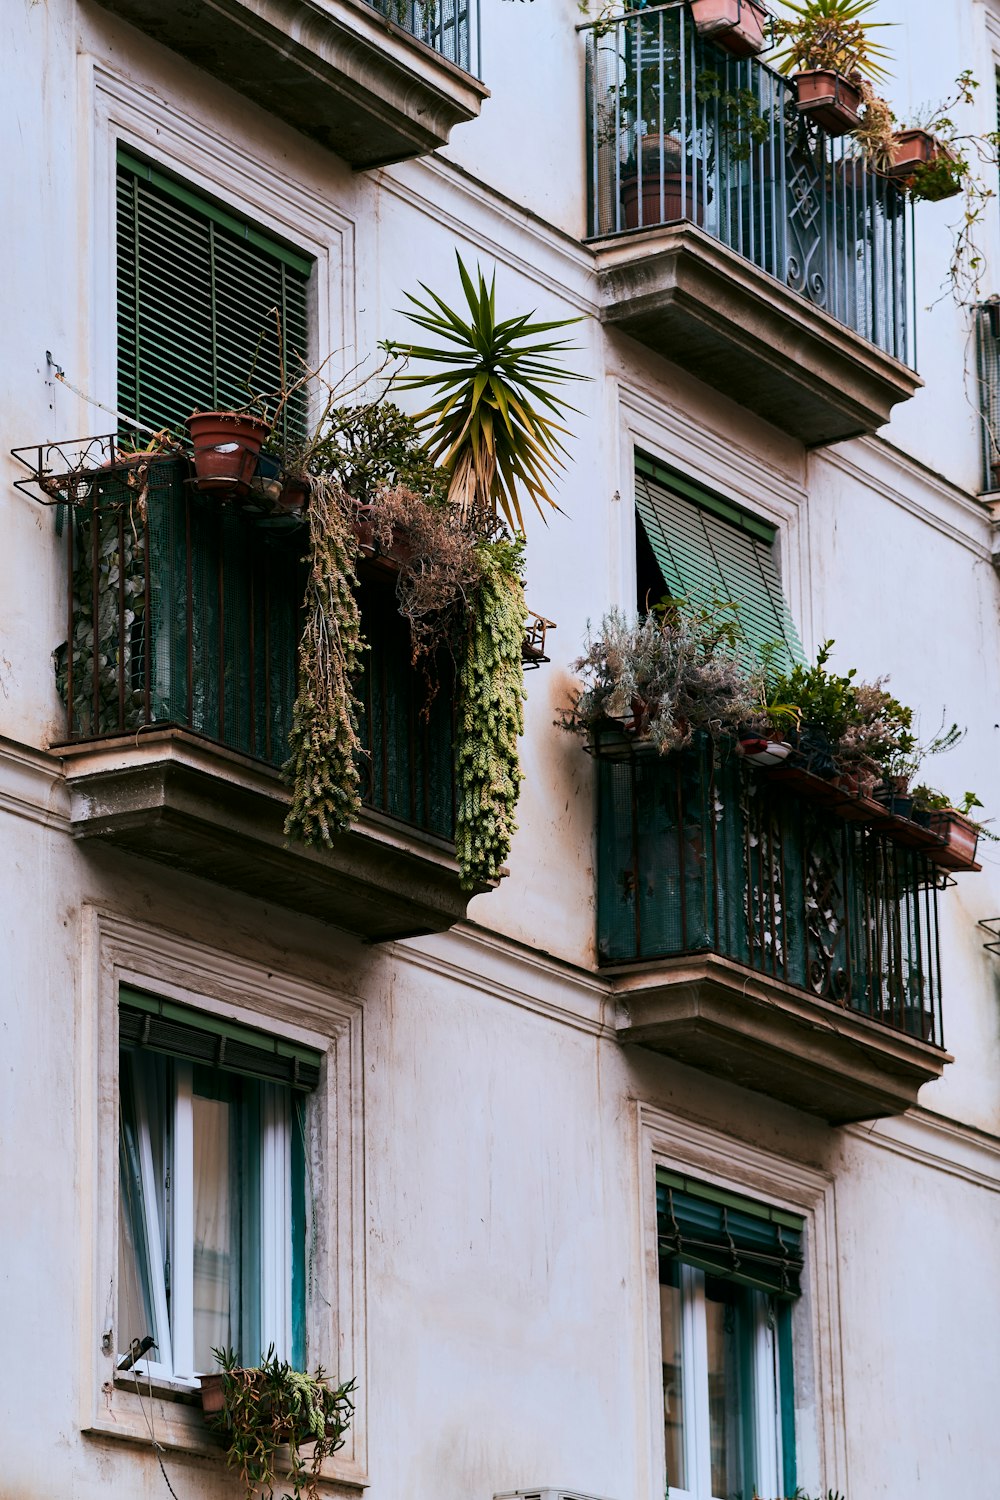 a building with plants growing on the windows